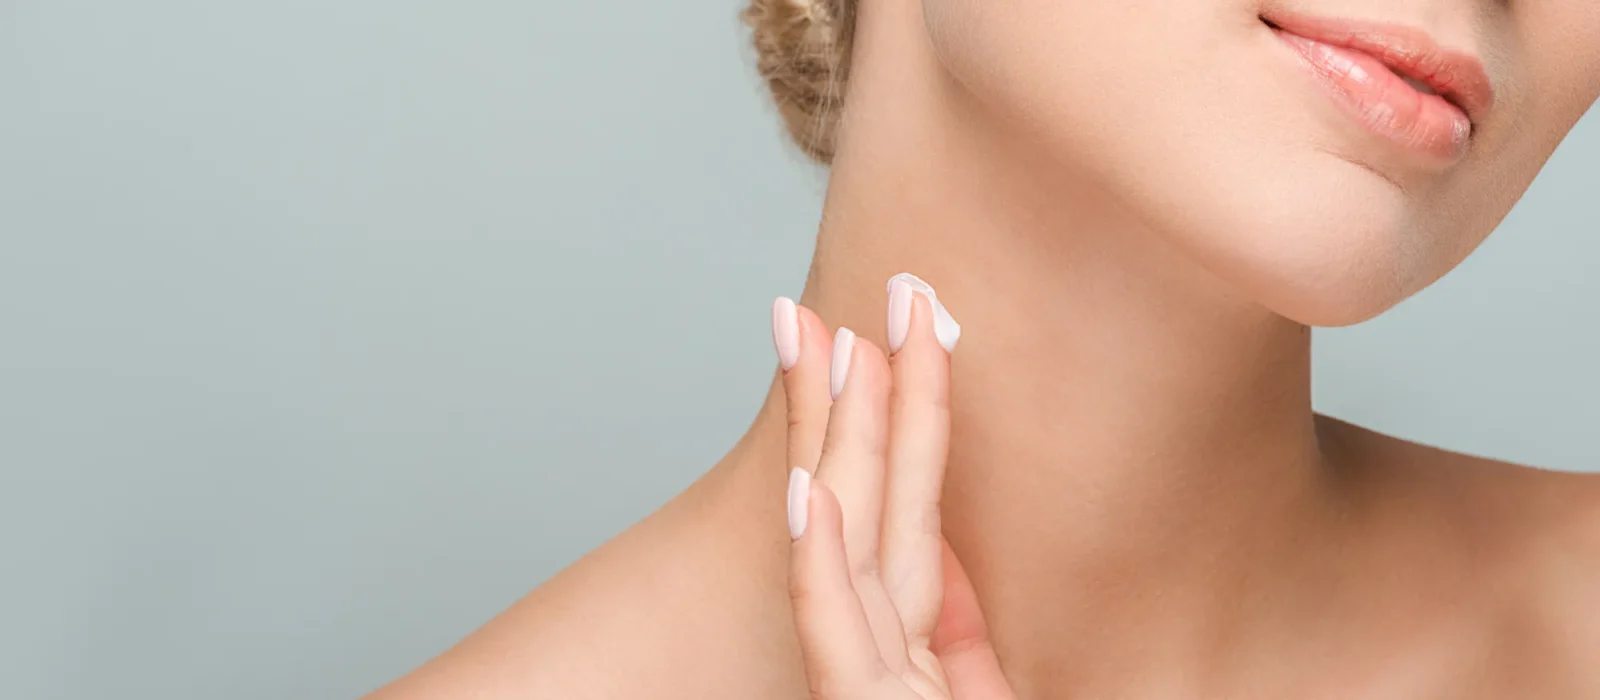 Top 11 Tips for Neck Skin Care